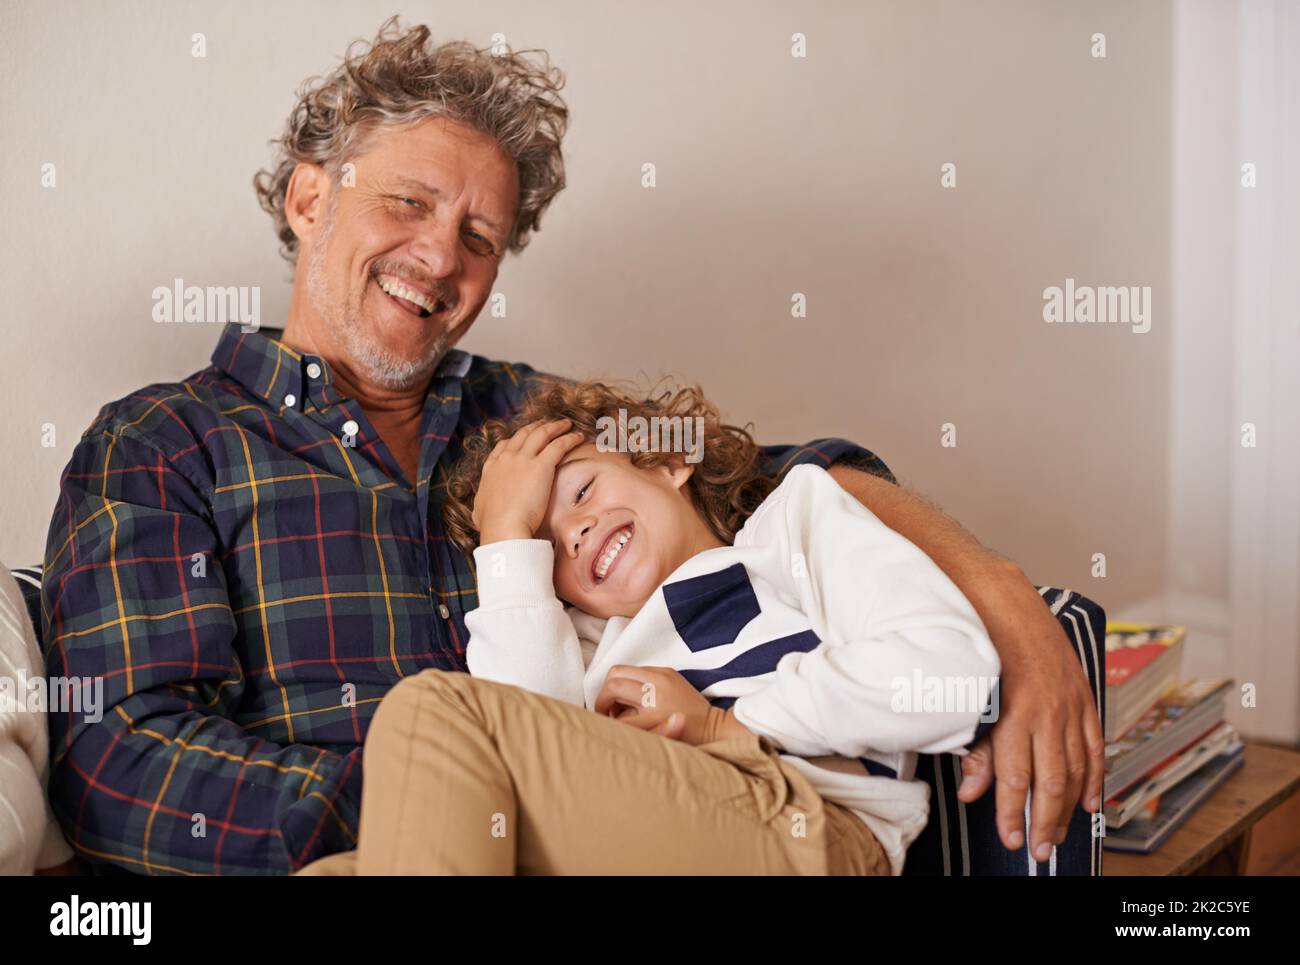 Having a laugh with Granddad. Portrait of a grandfather spending quality time with his grandson indoors. Stock Photo